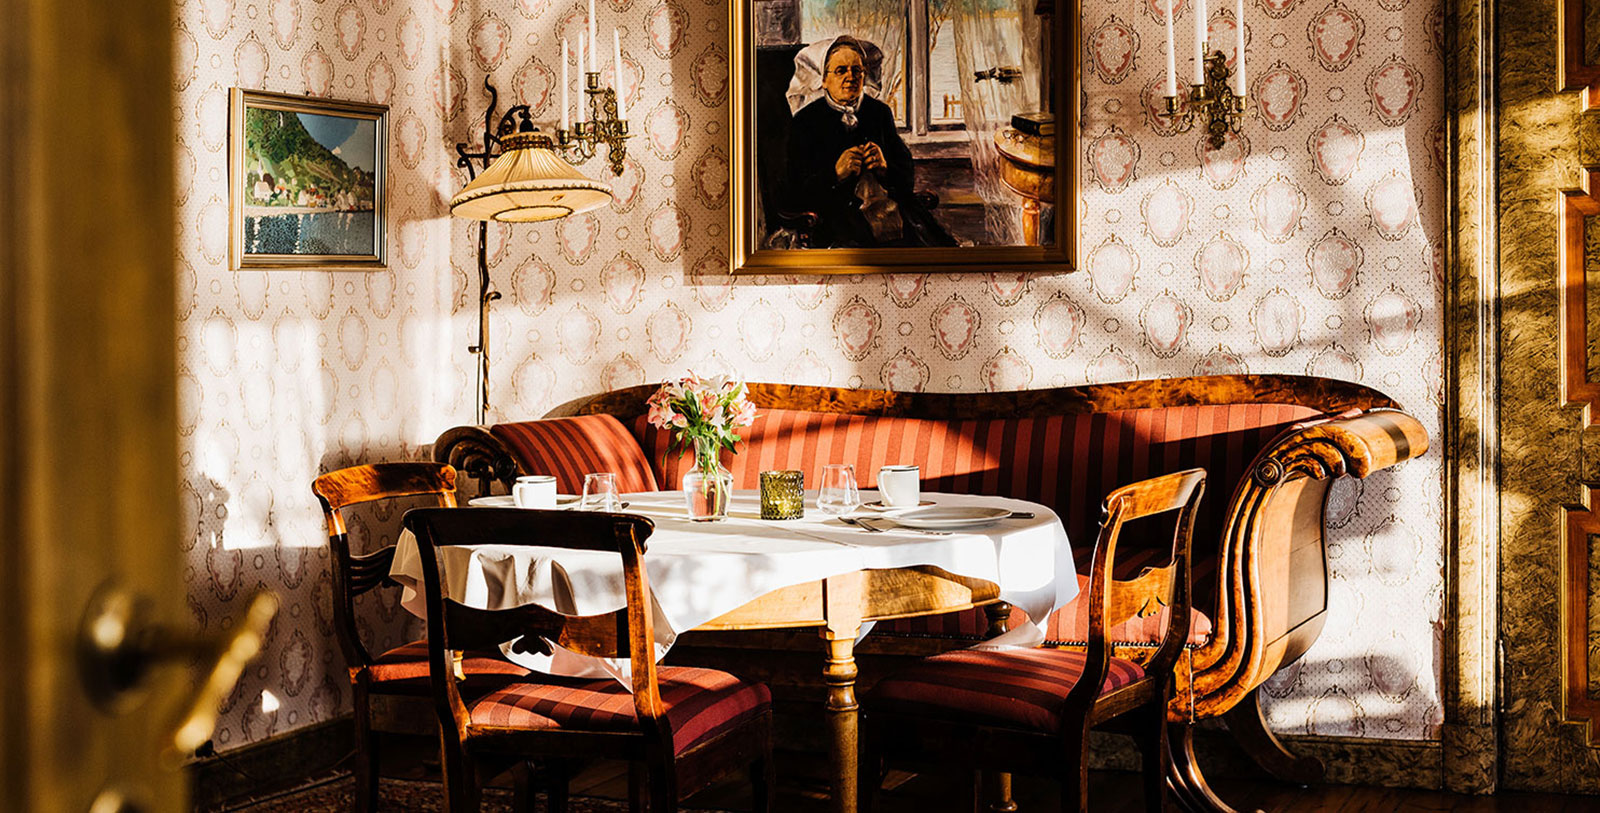 Image of Lounge Area at Utne Hotel, 1722, Member of Historic Hotels Worldwide, in Utne, Norway, Special Occasions